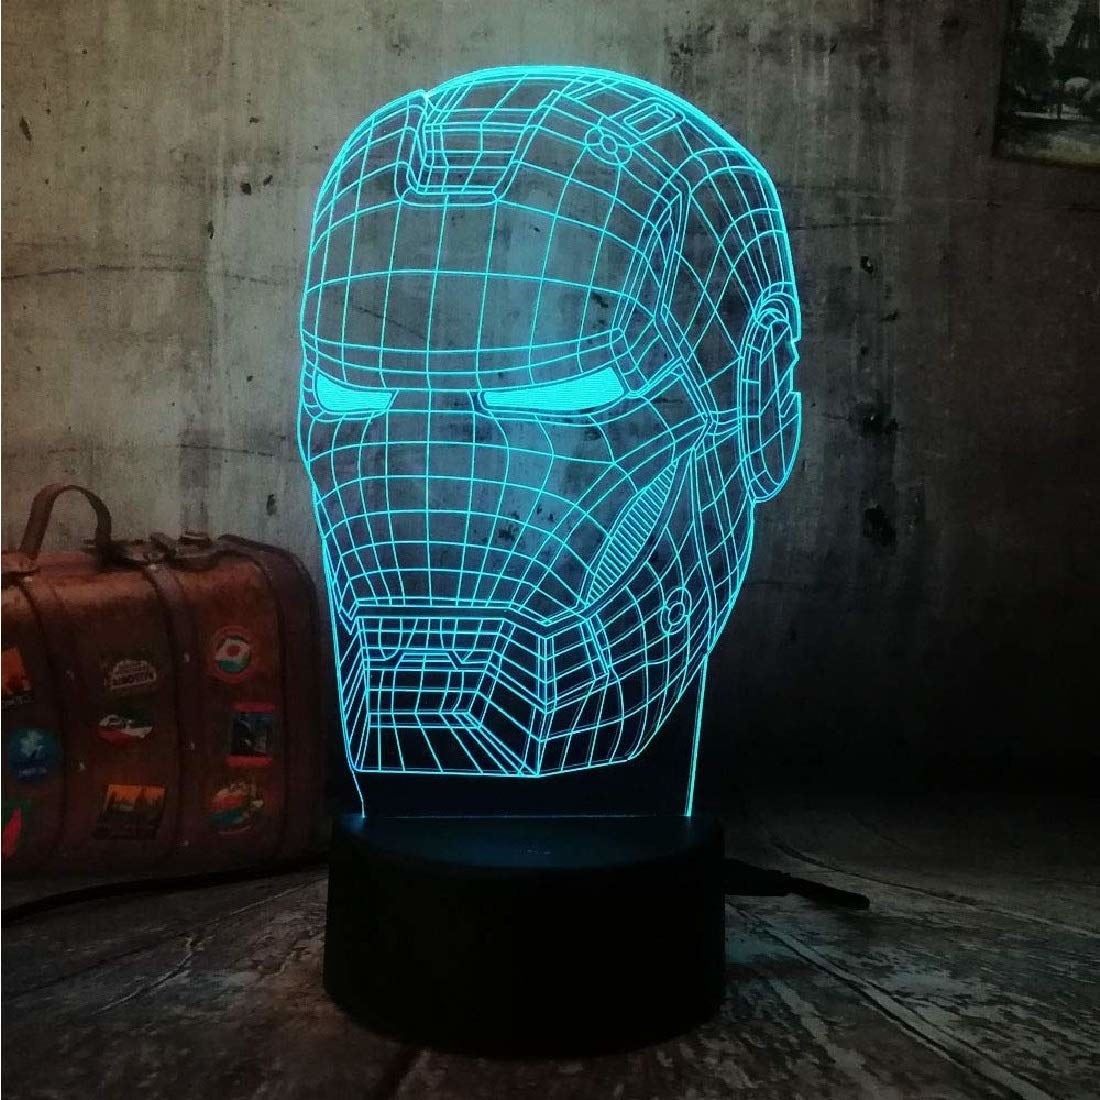 A lamp that has a glowing wireframe in the shape of Iron Man&#x27;s helmet. The wireframe gives it the illusion of being a hologram.